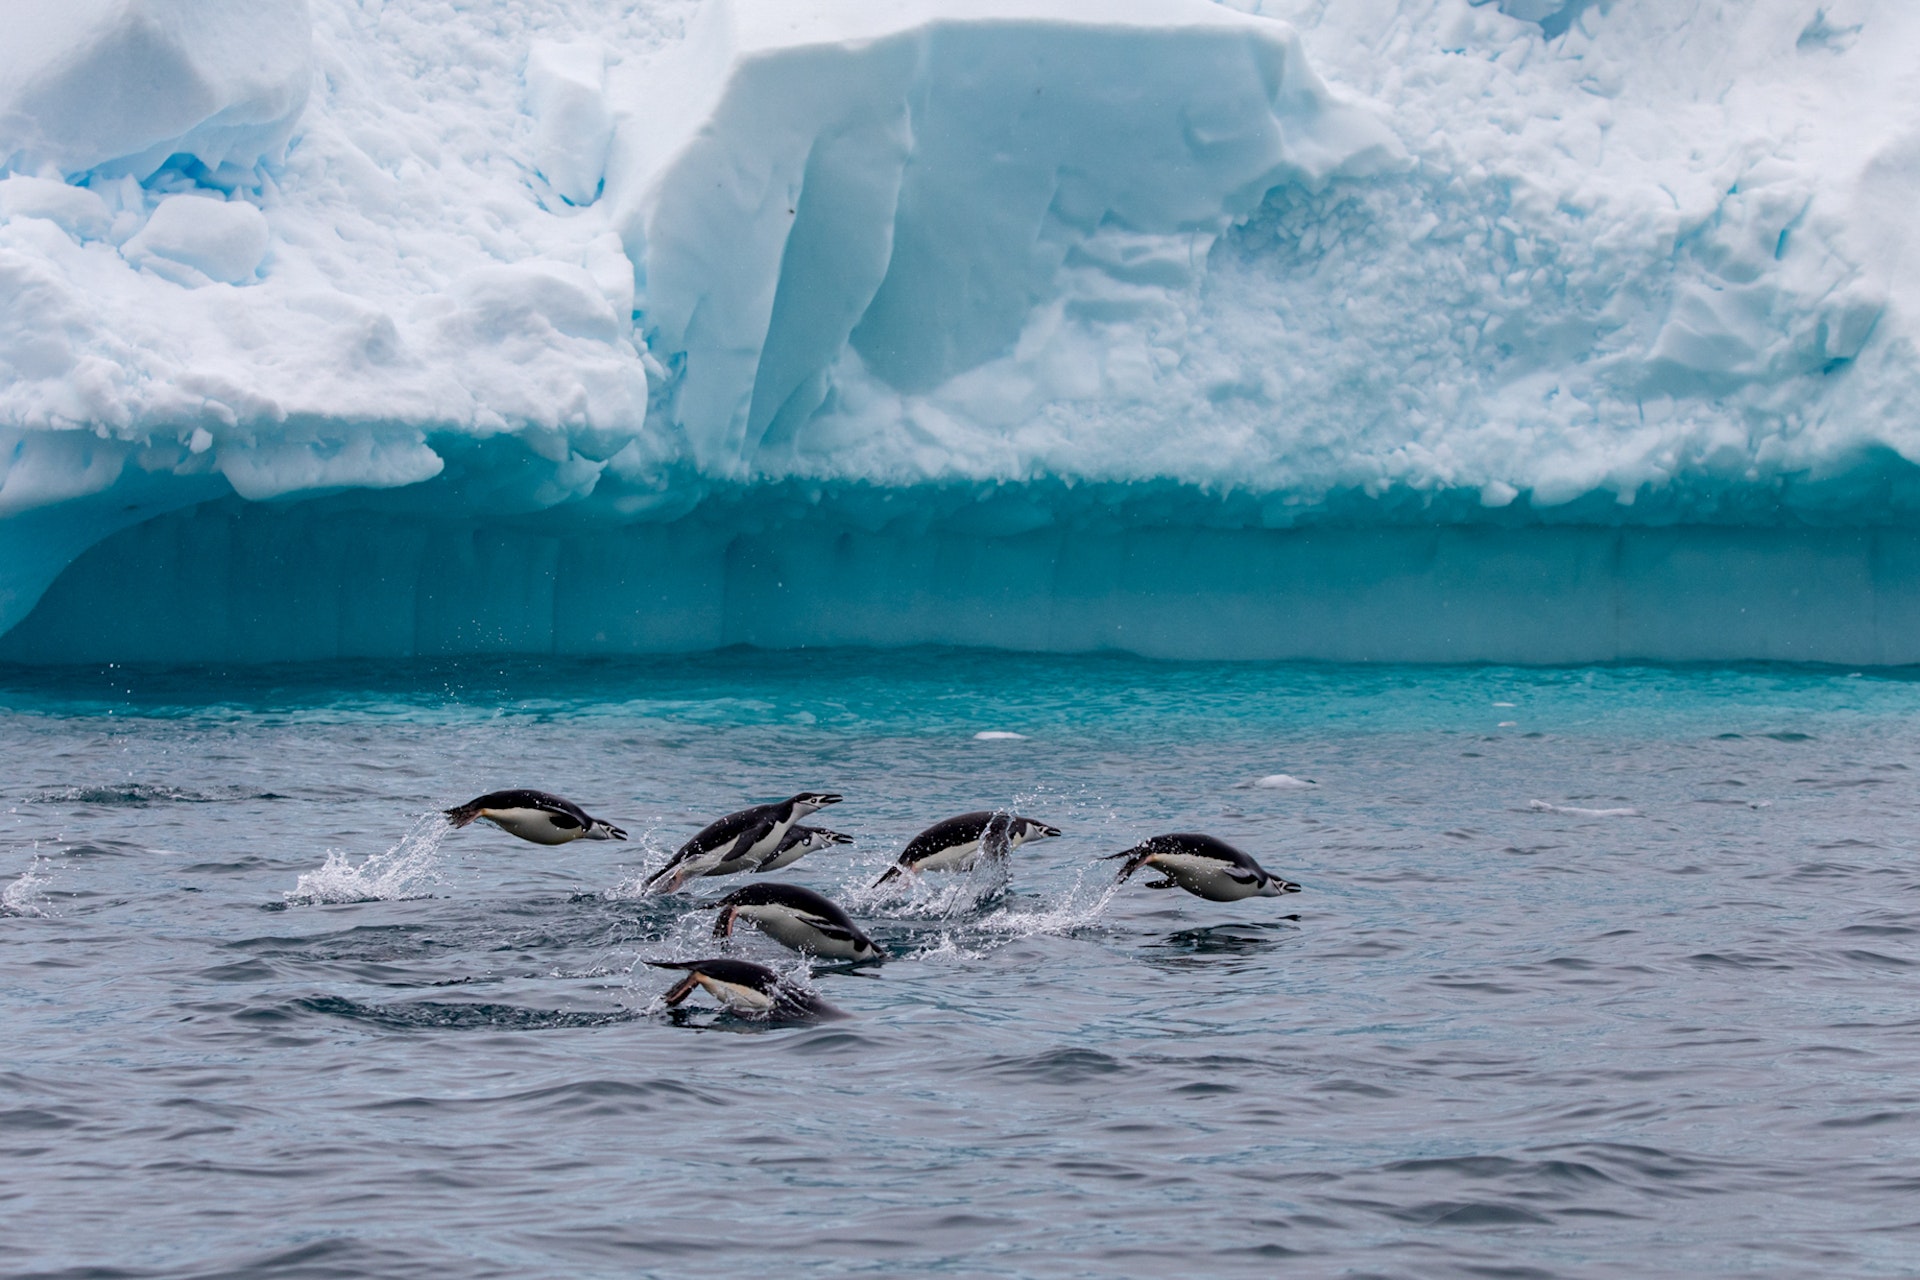 Several penguins leaping out of water with an iceberg in the background.